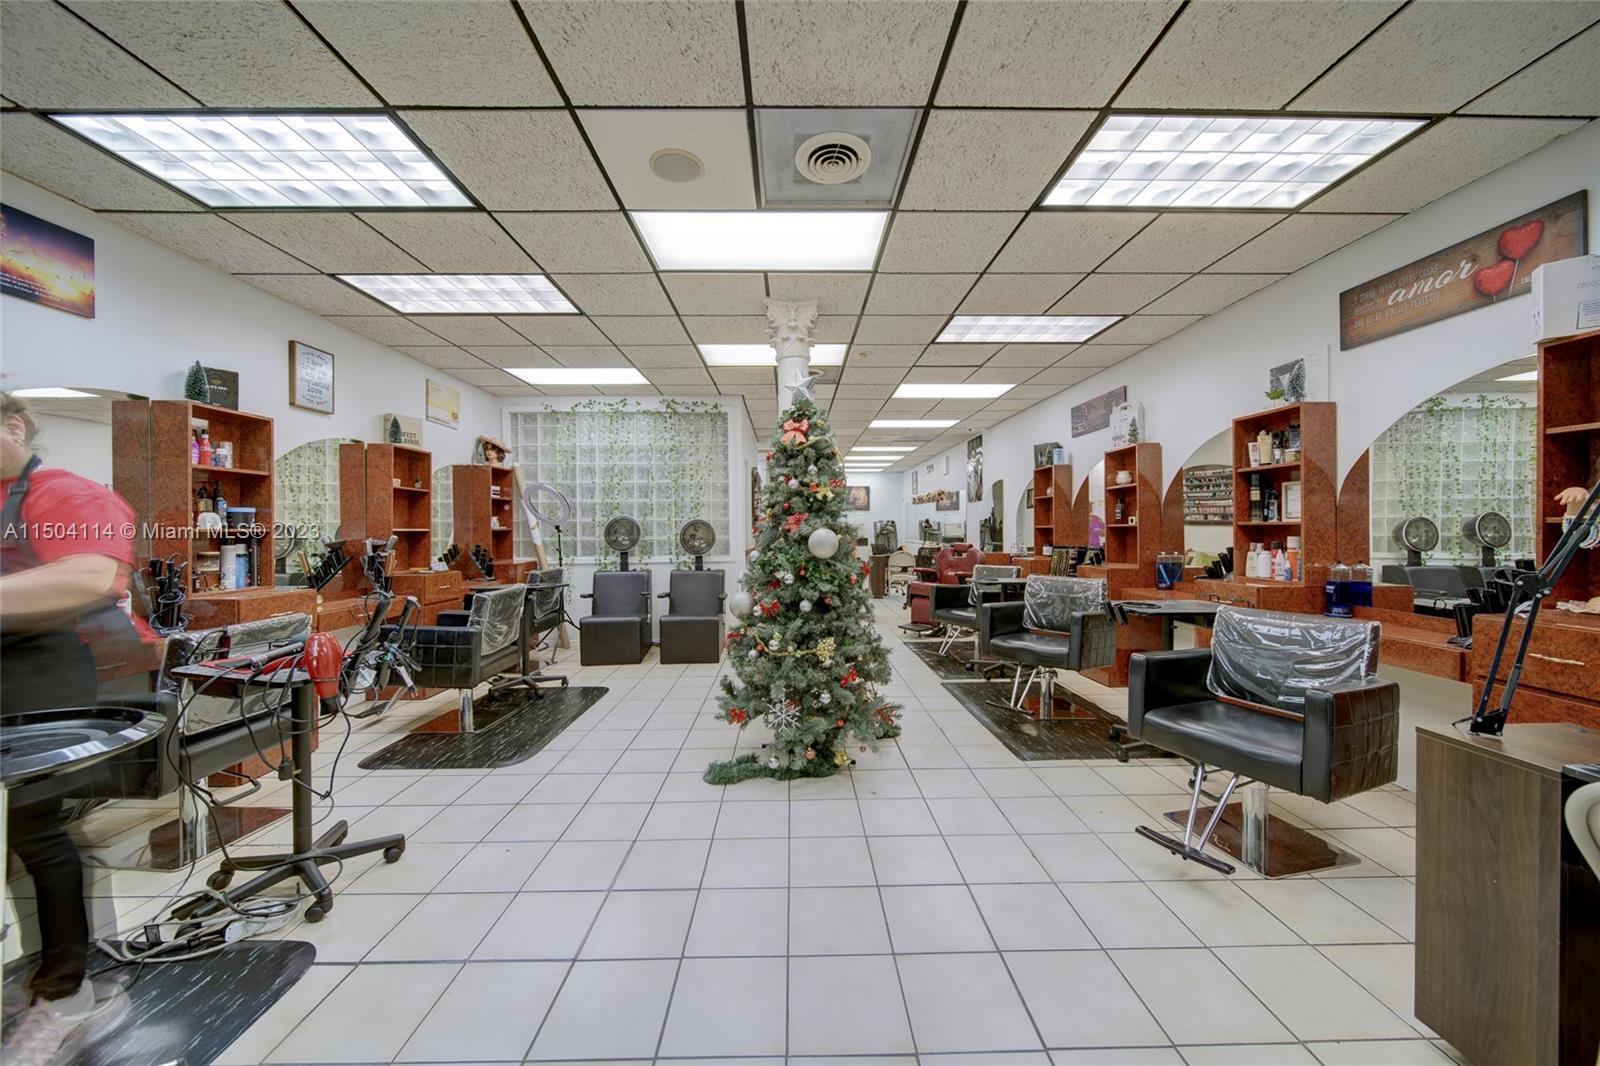   Salon For Sale in The Crossings  For Sale A11504114, FL